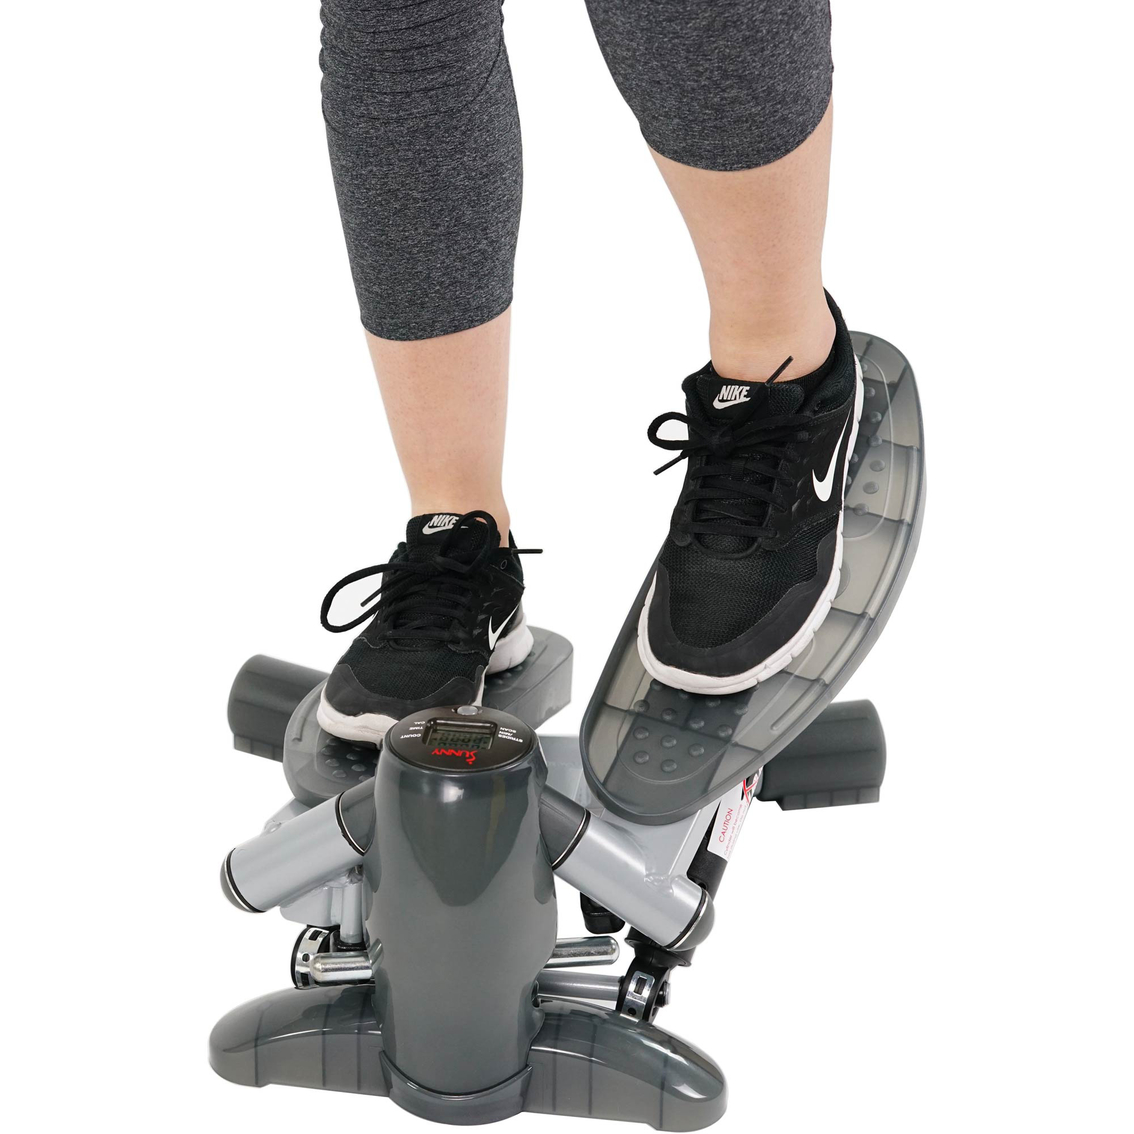 Sunny Health and Fitness Twist In Stepper - Image 9 of 10